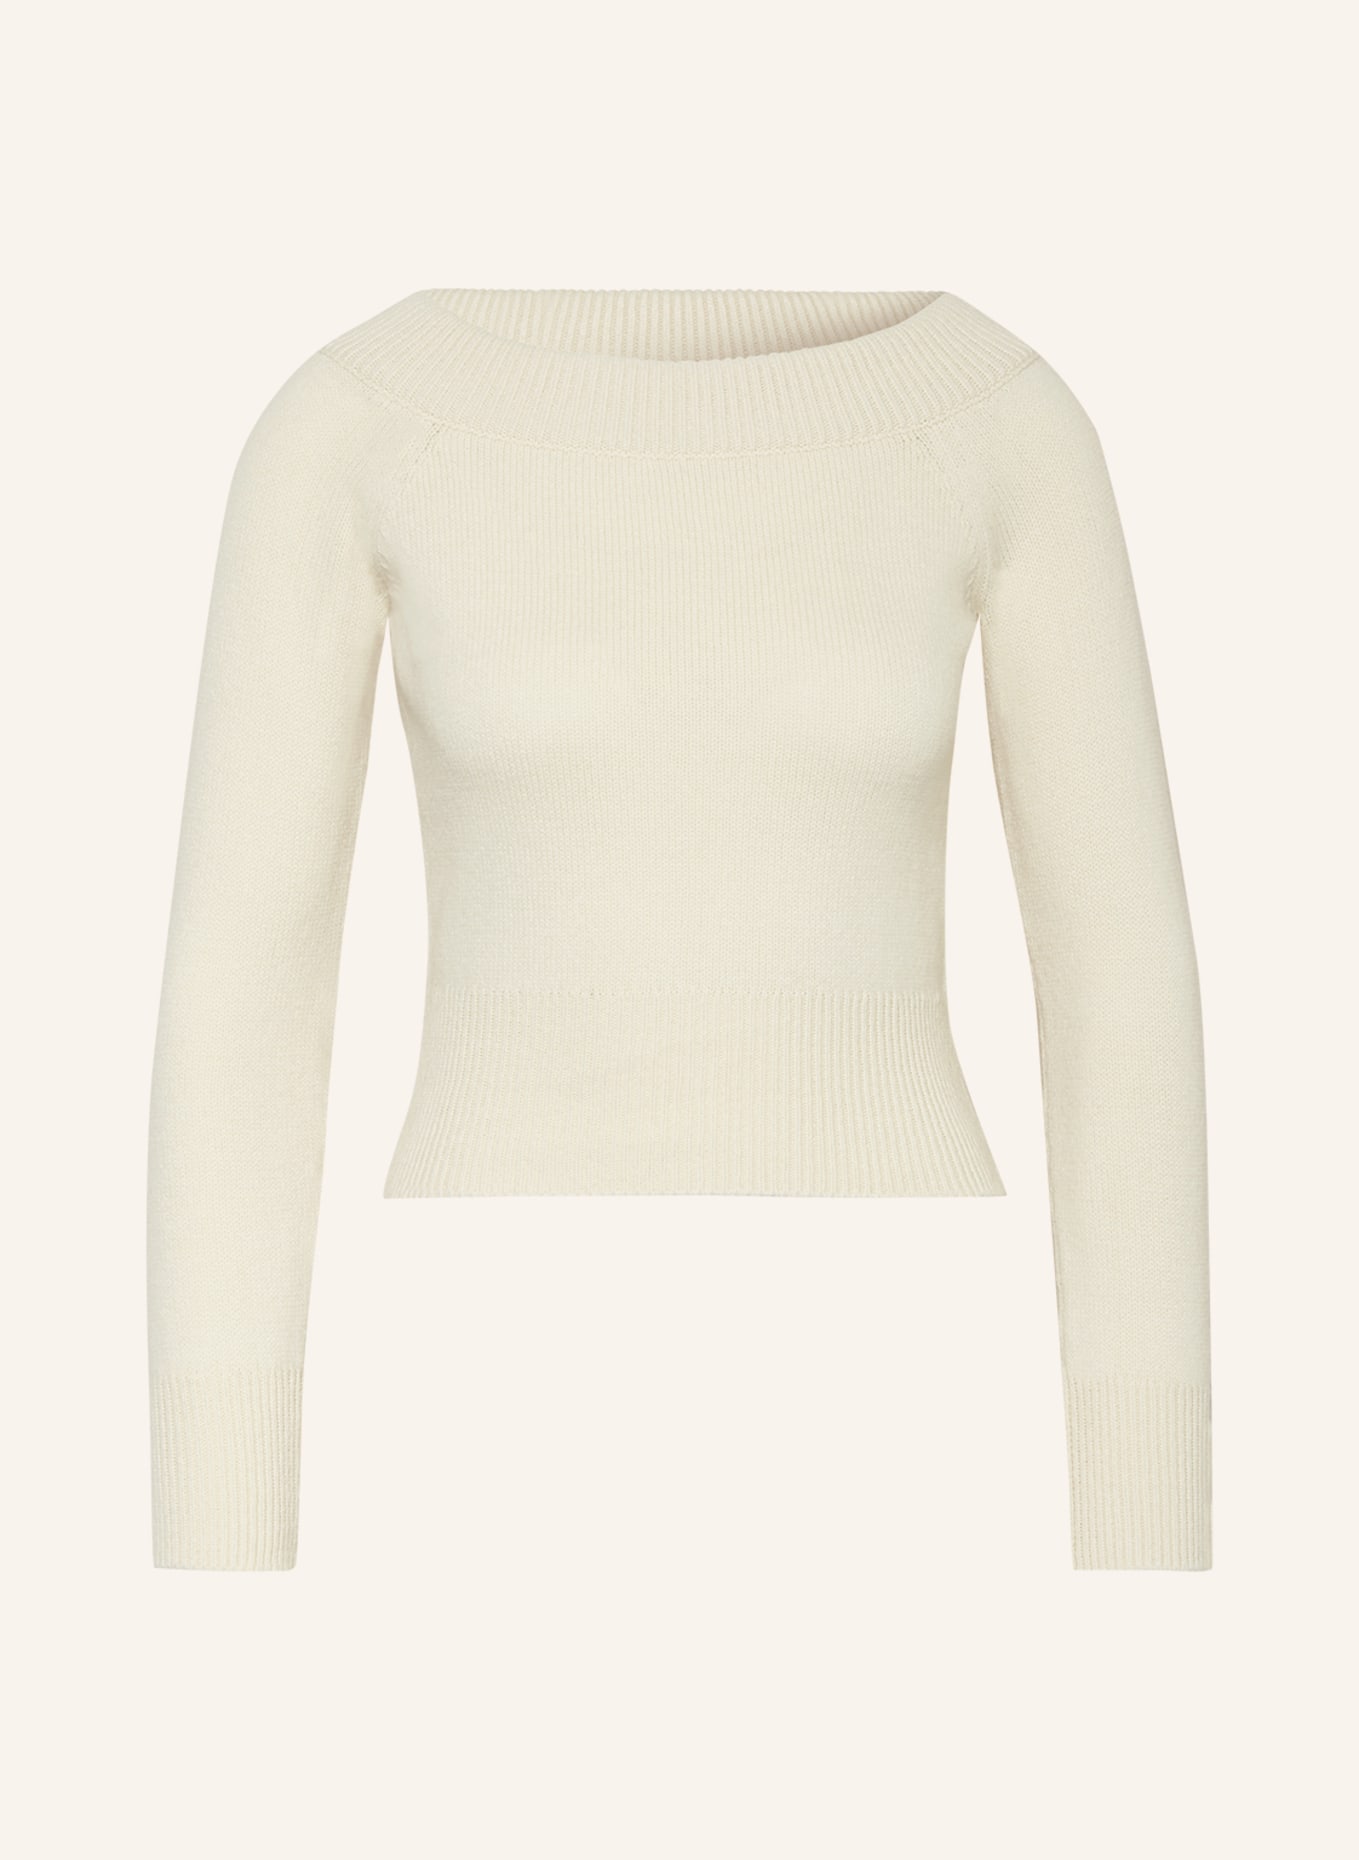 Alexander McQUEEN Sweater with cashmere, Color: ECRU (Image 1)